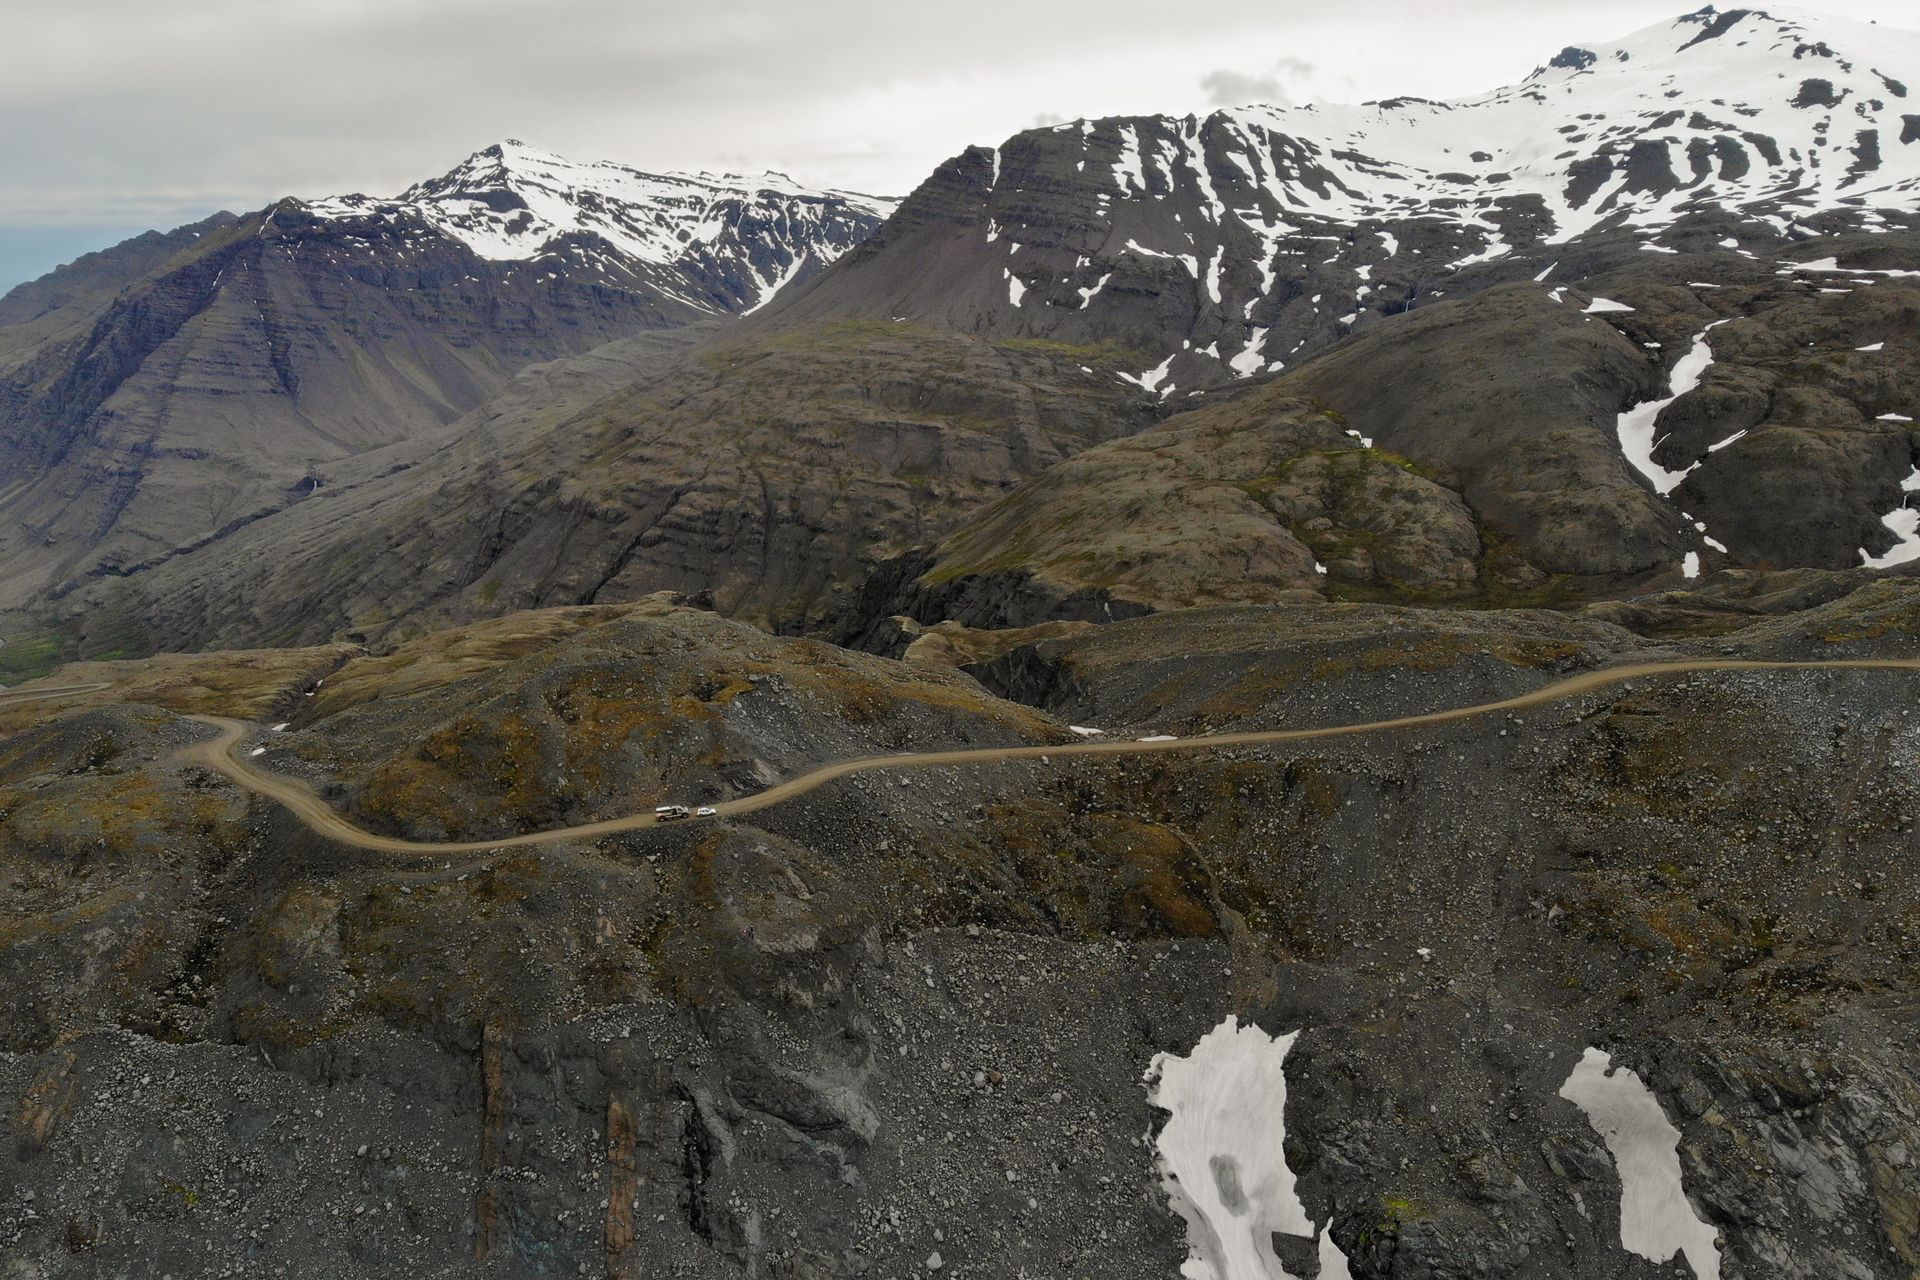 Aerial view of mountain road F985 leading to Joklasel and the Skalafellsjokull glacier, part of Vatnajökull National Park, Iceland. Panoramic landscape shot by drone camera.